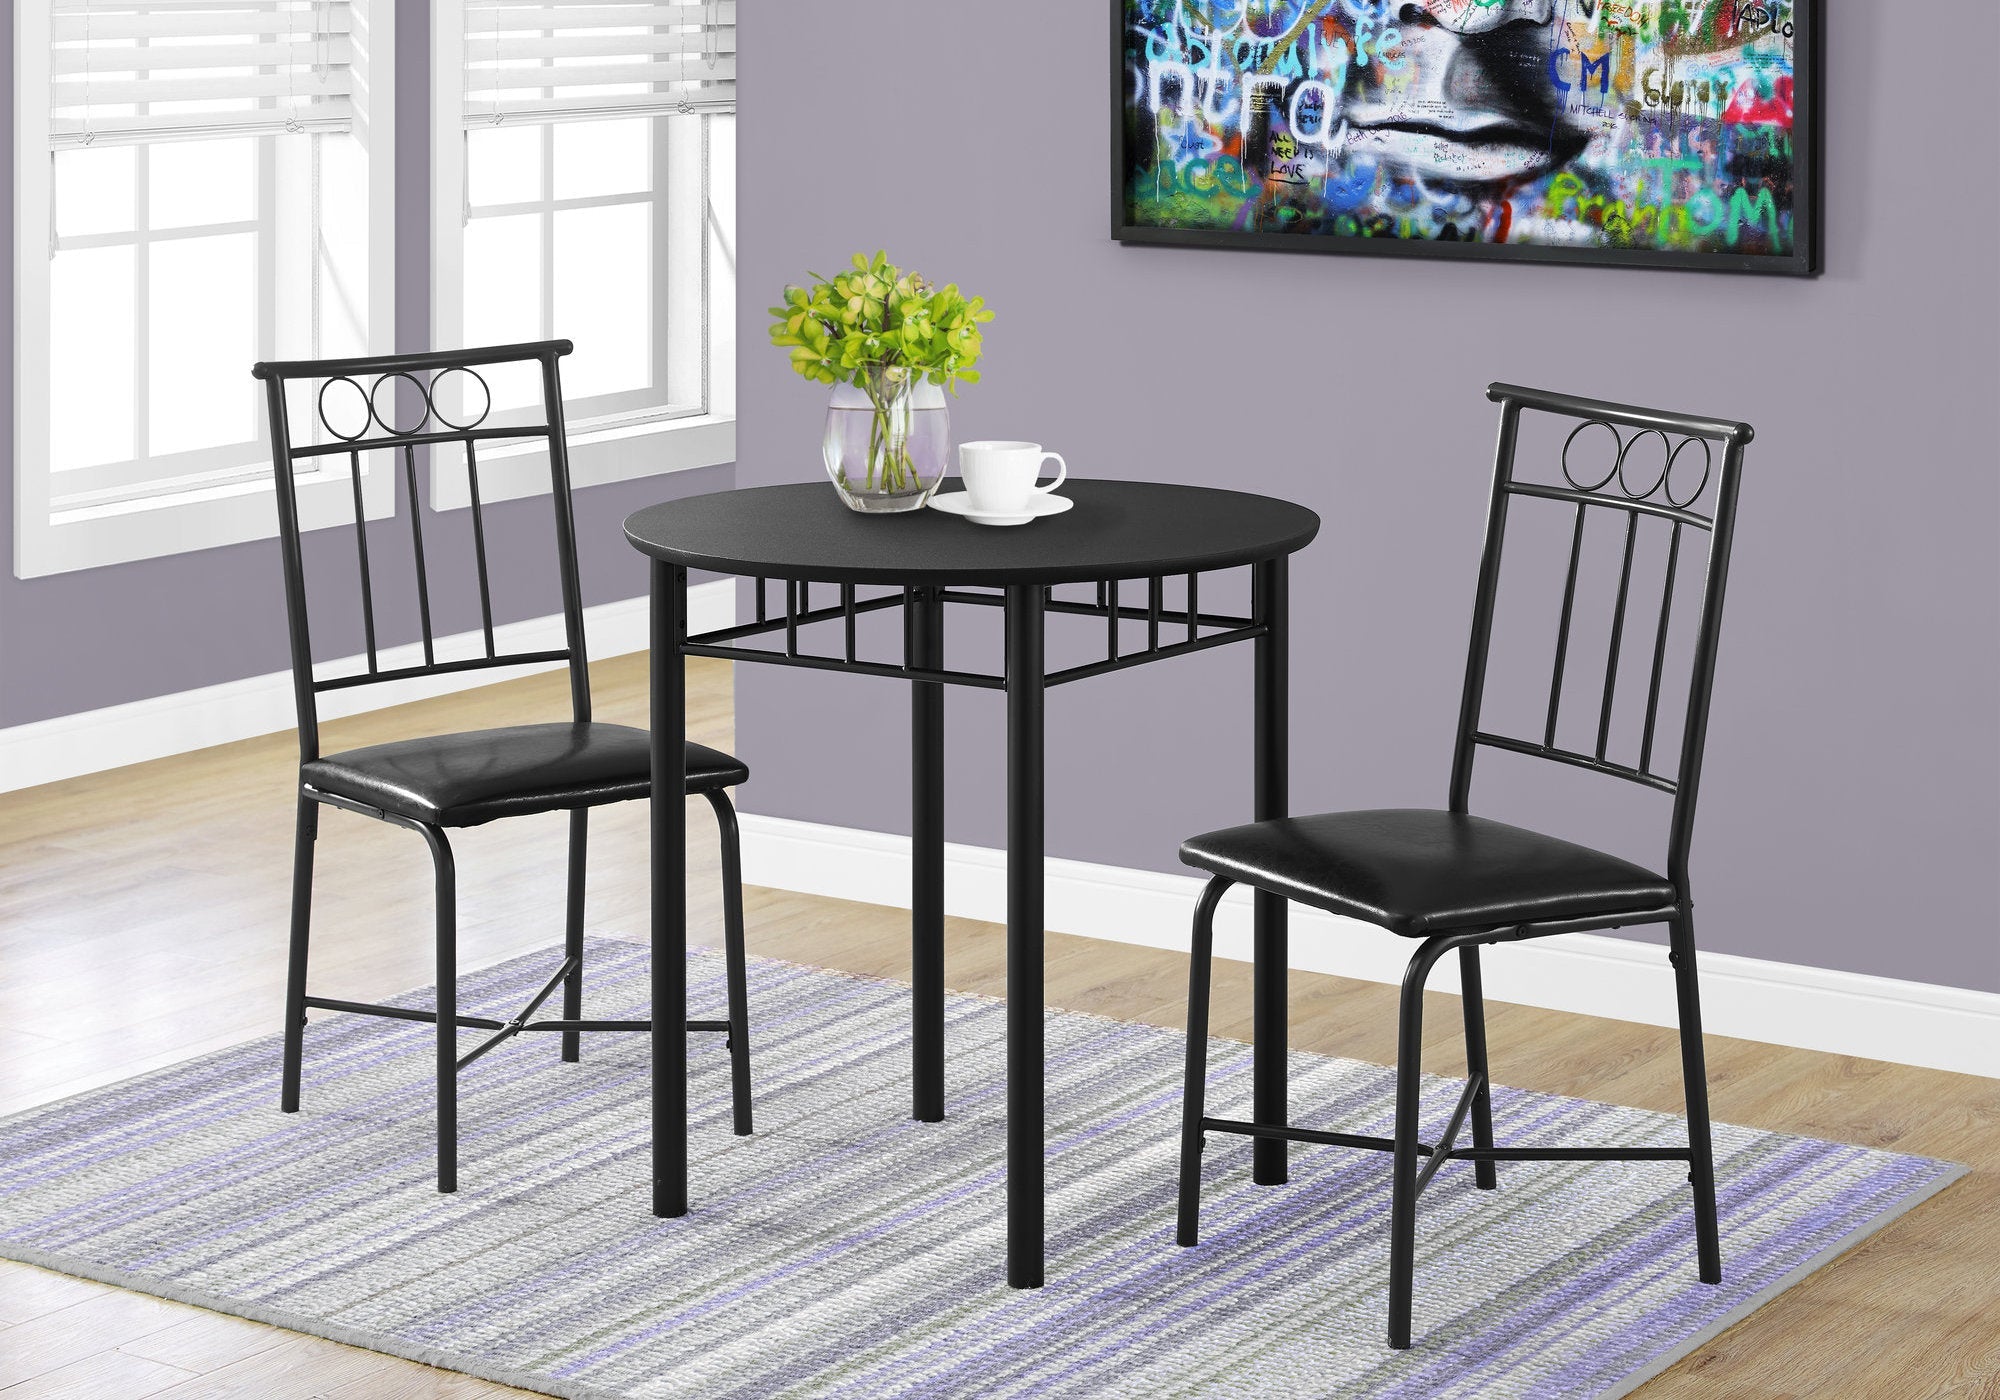 35" Black Leather Look Foam And Metal Three Pieces Dining Set - Tuesday Morning-Dining Sets